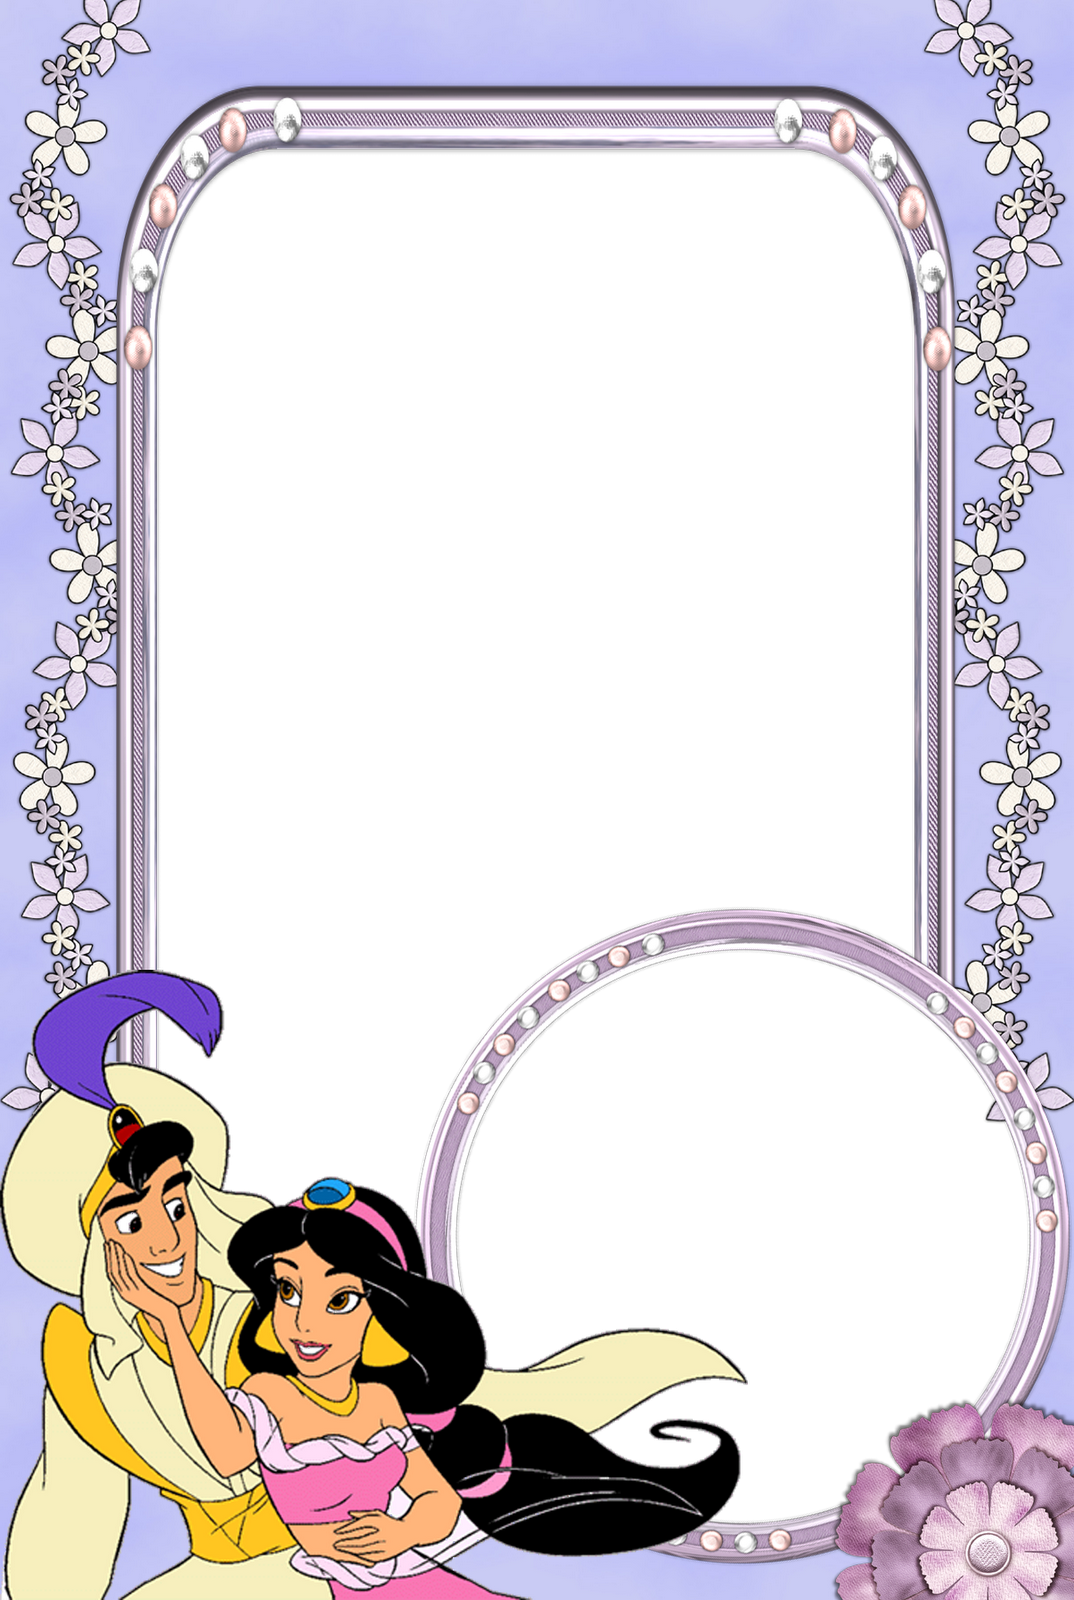 Aladdin Frame Wallpapers High Quality | Download Free